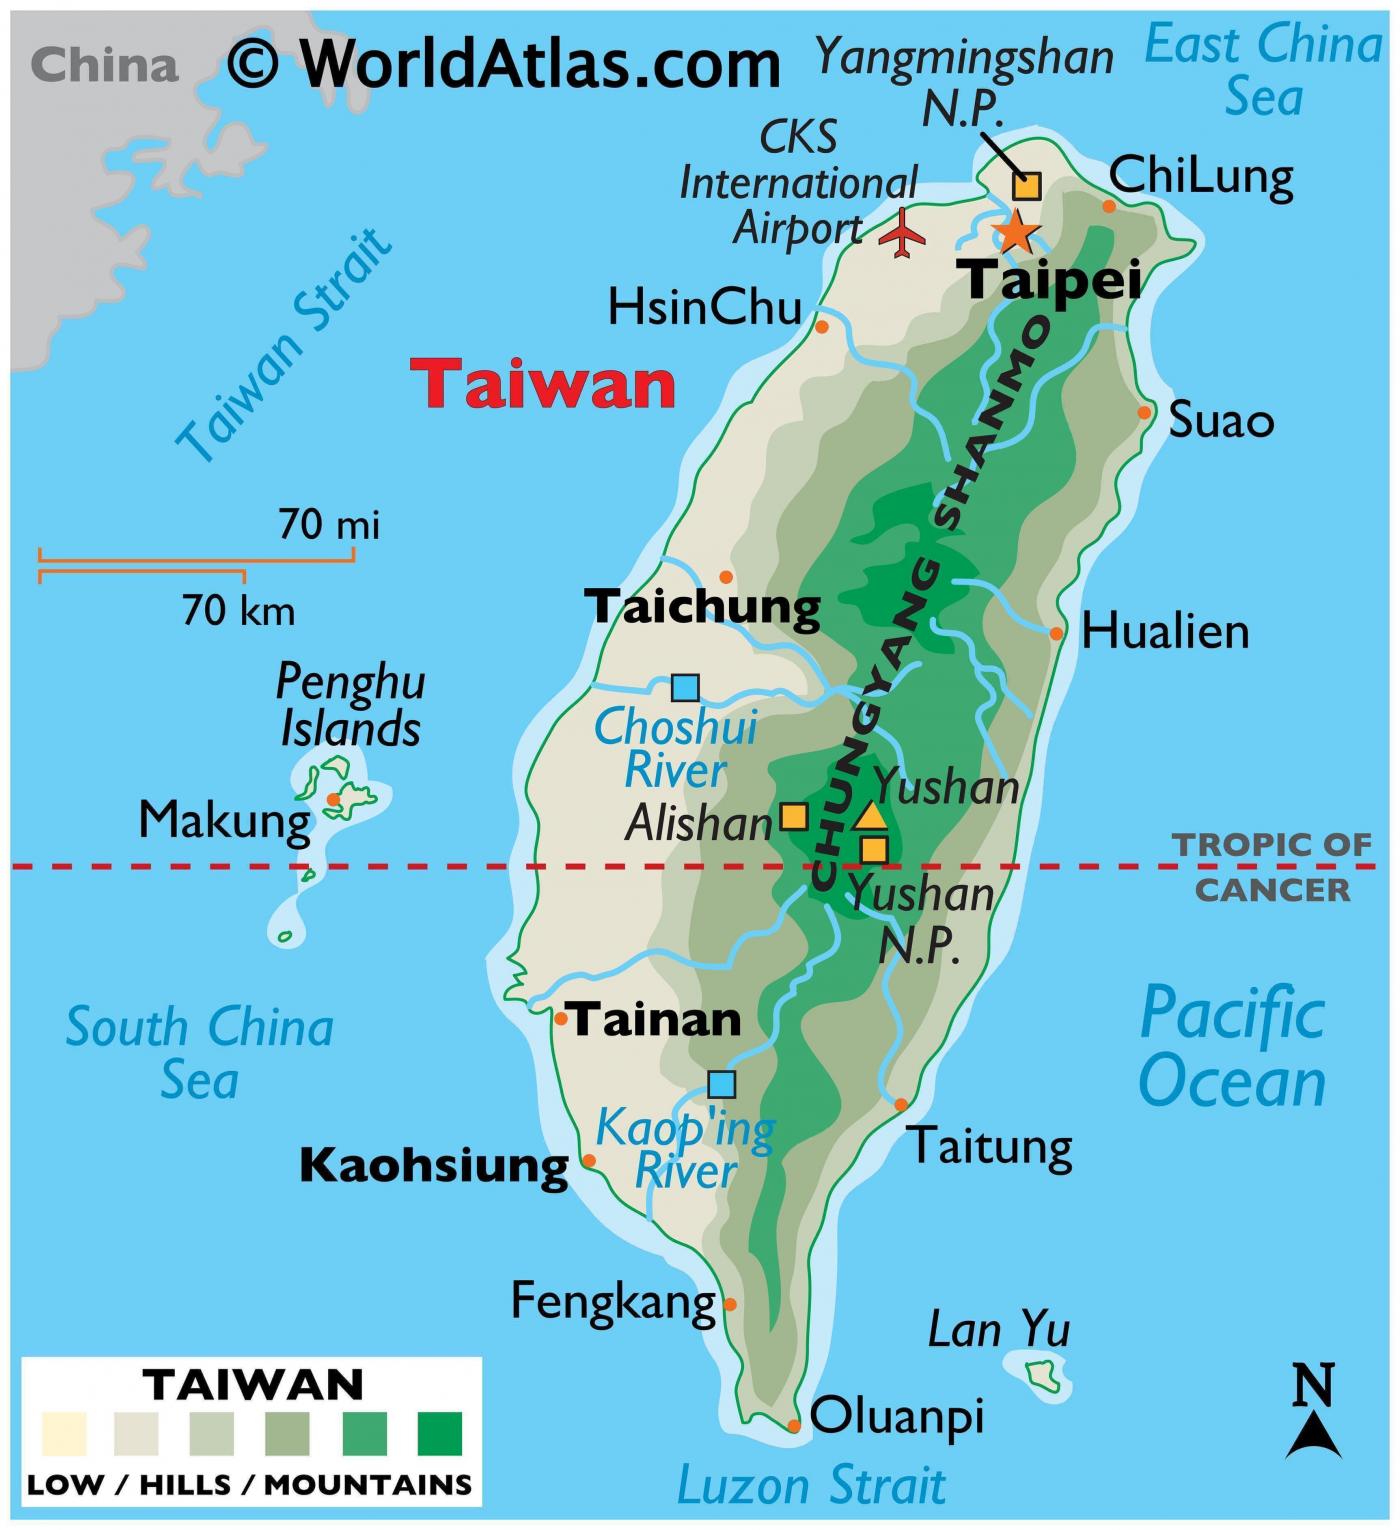 A map of Taiwan, showing the different regions of the territory